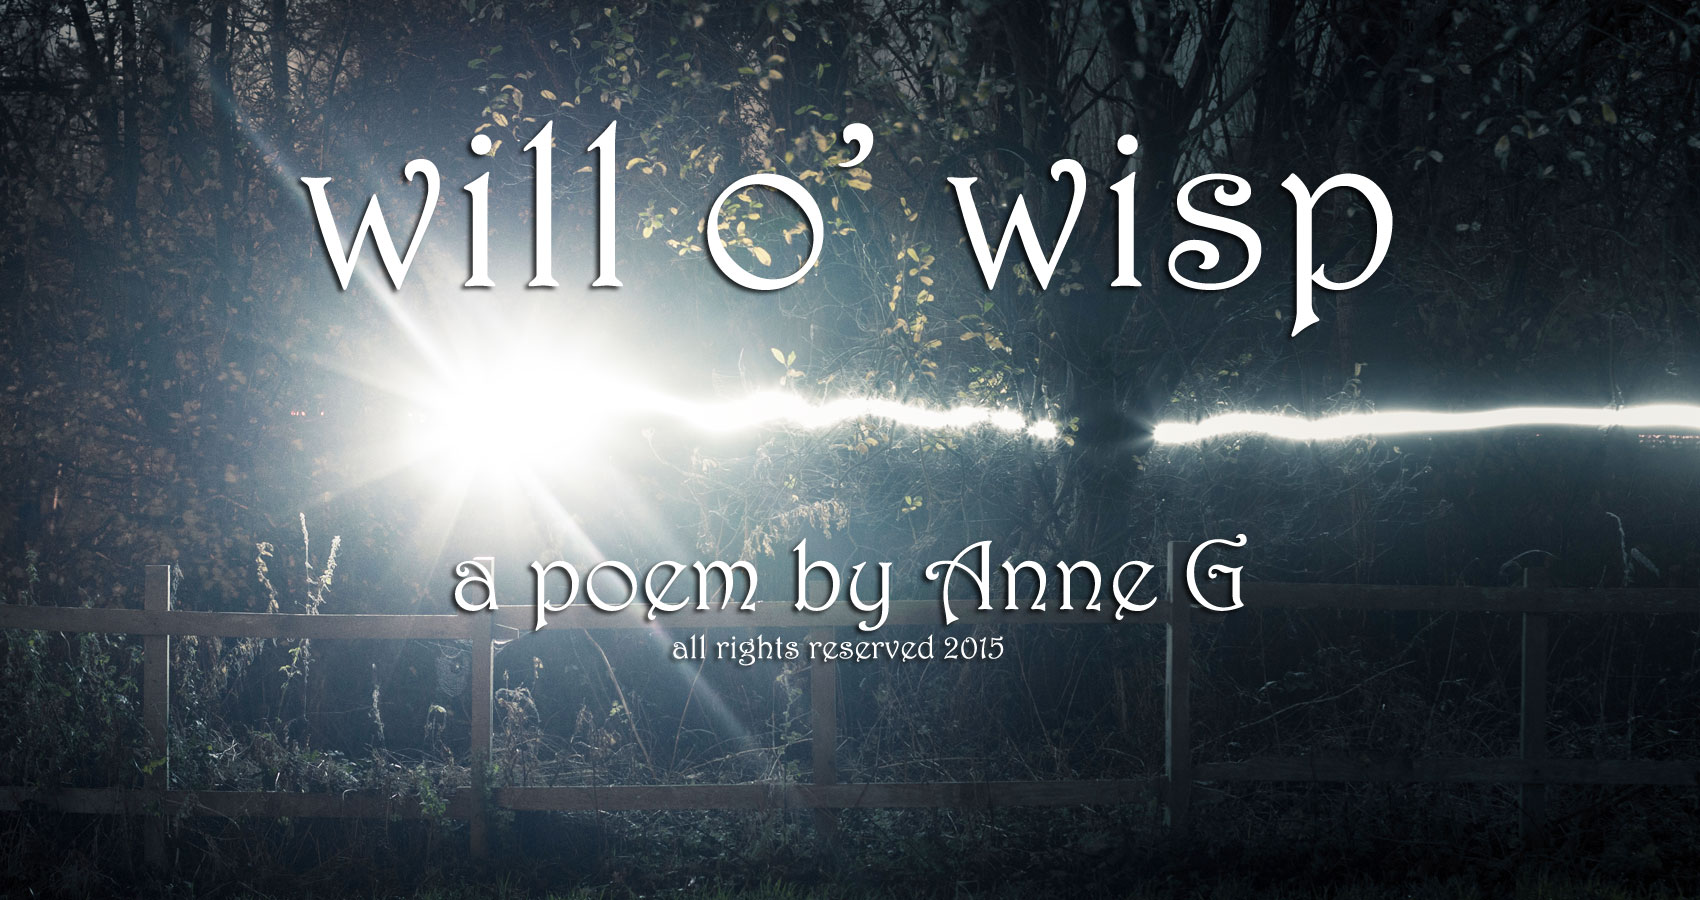 Will O' Wisp poetry at spillwords.com by Anne G